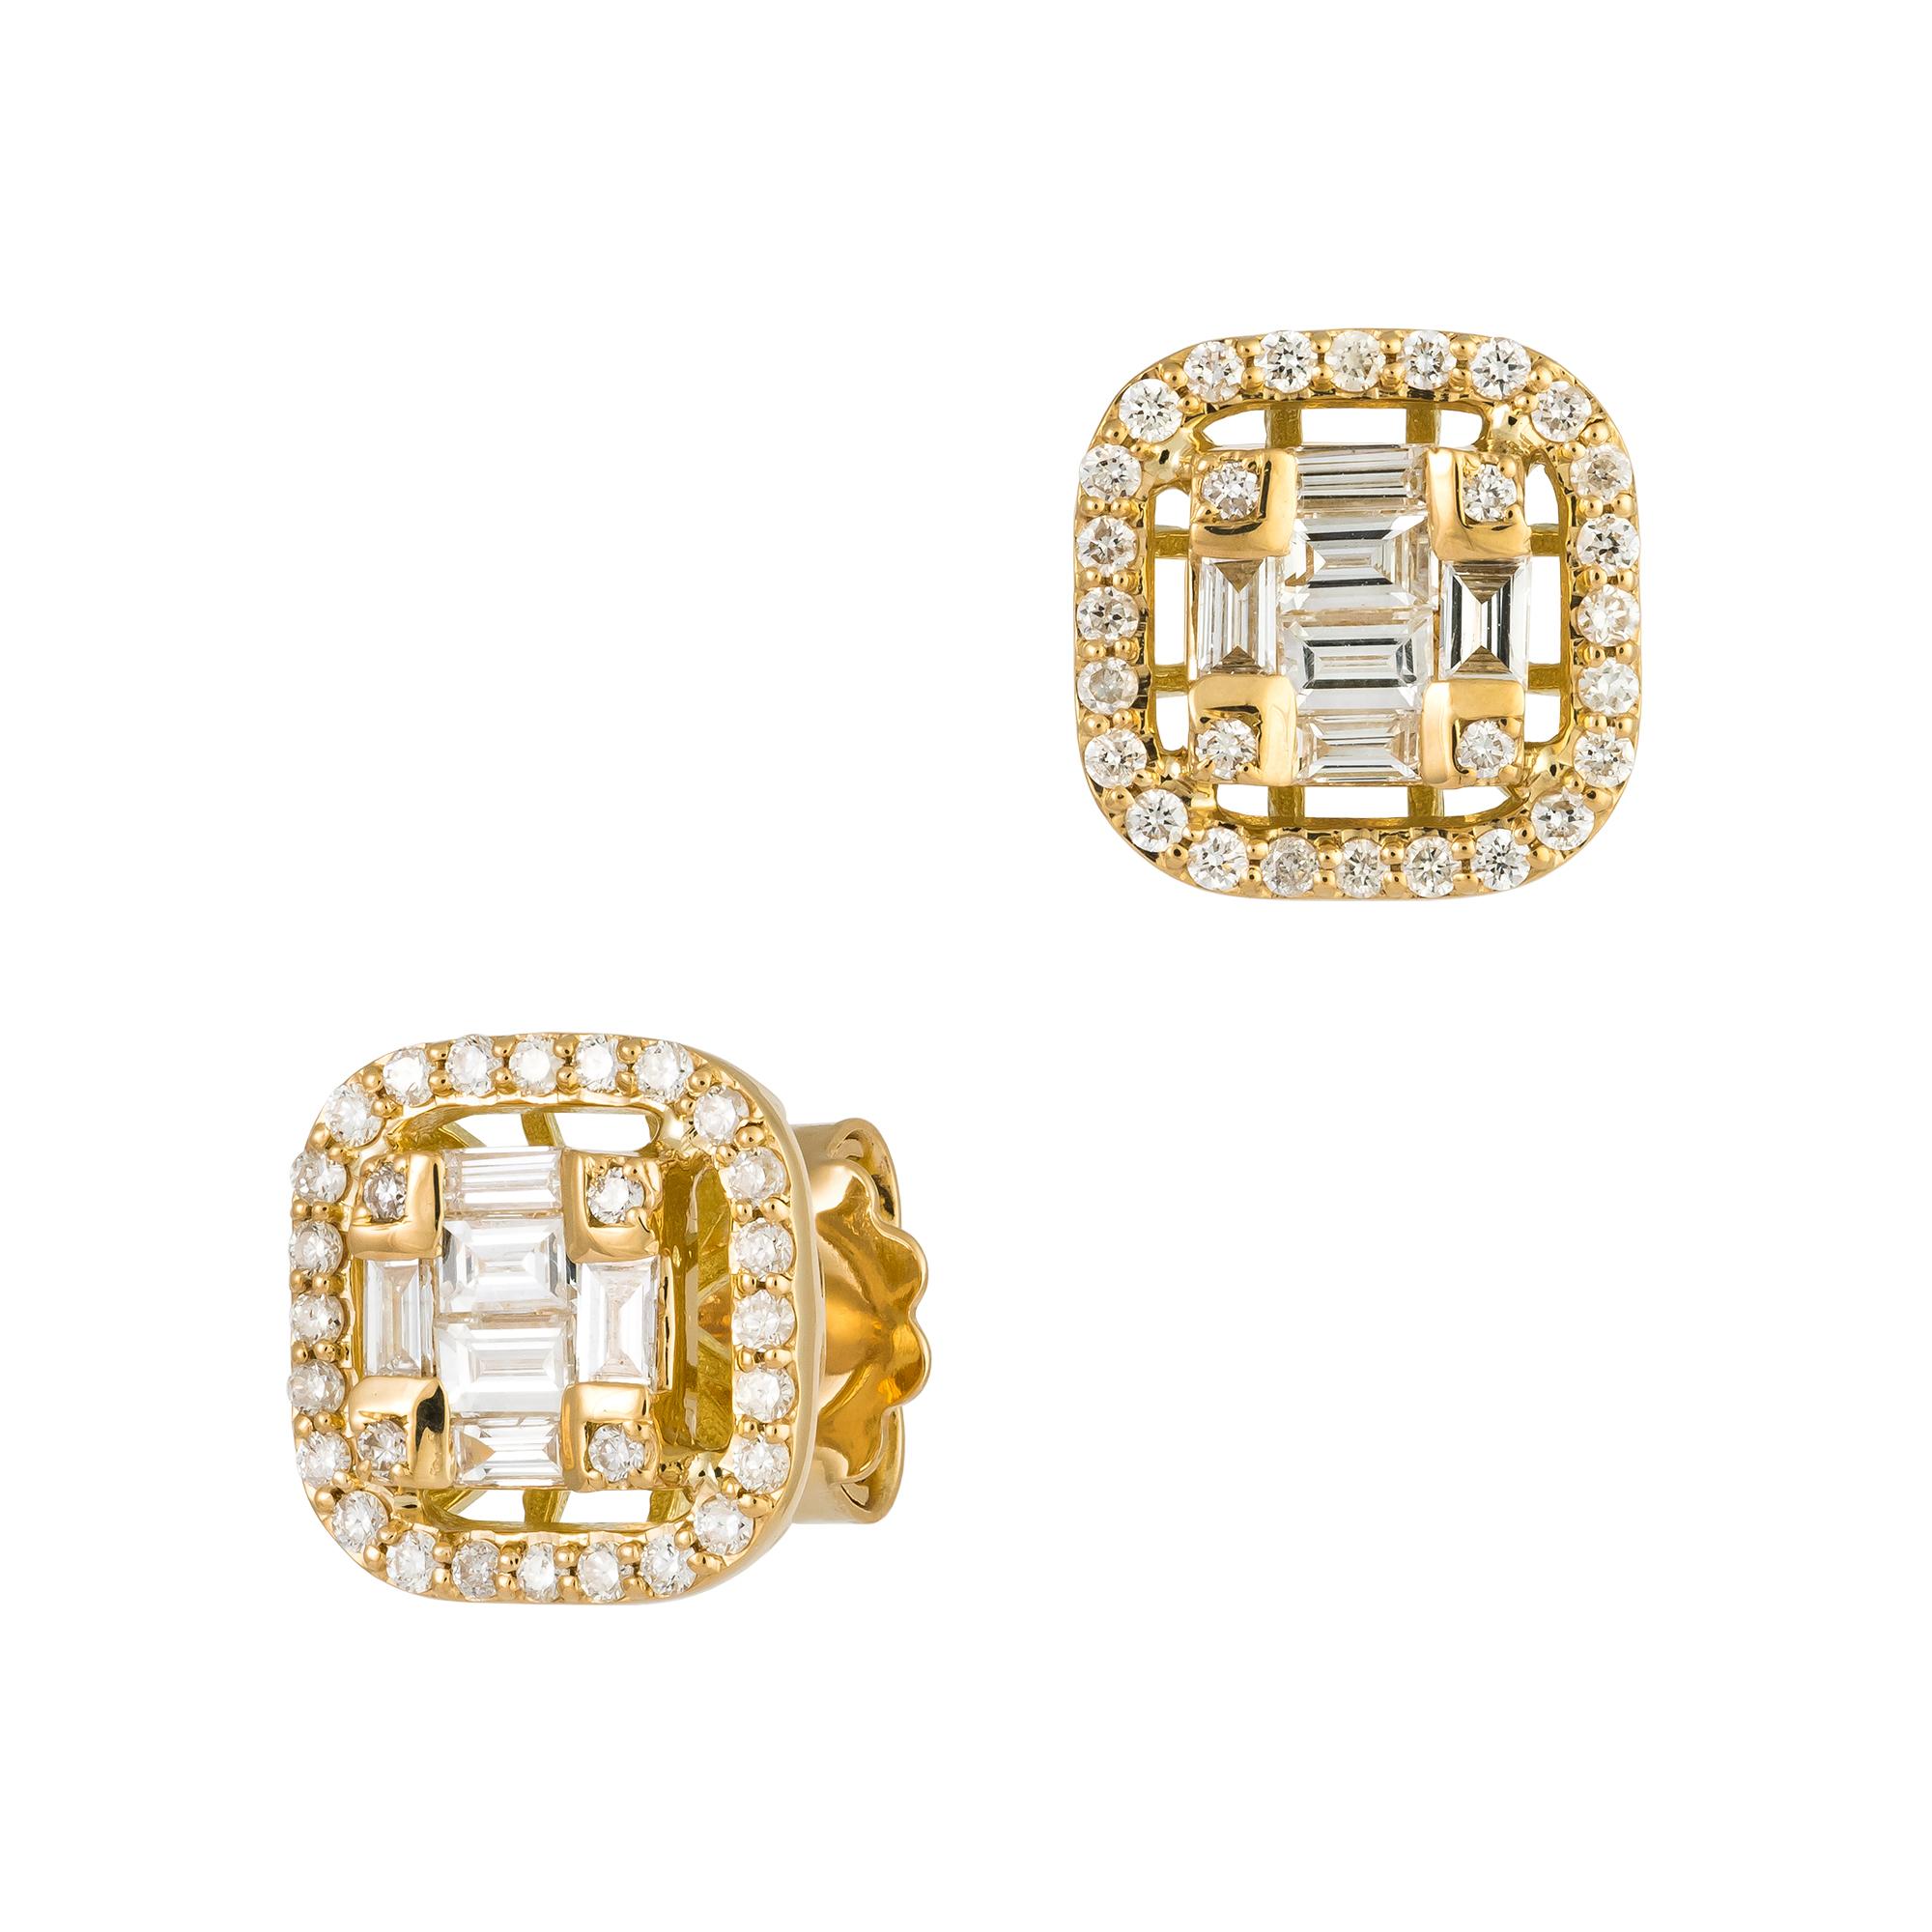 EARRING 18K Yellow Gold Diamond 0.27 Cts/56 Pcs Tapered Baguette 0.35 Cts/12 Pcs
